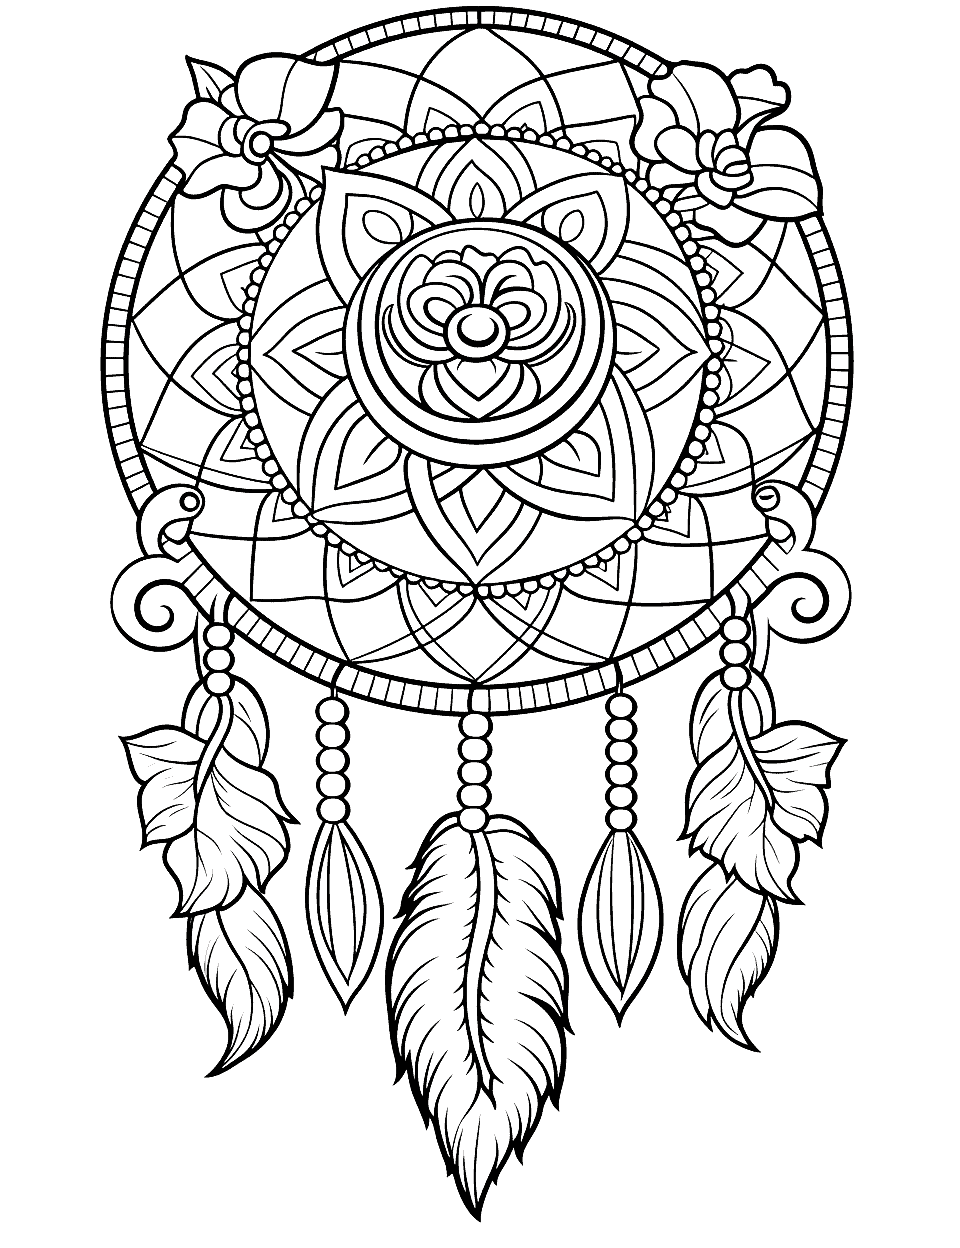 Dream Catcher Adult Coloring Page - A dream catcher design inspired by popular trends, filled with intricate details.